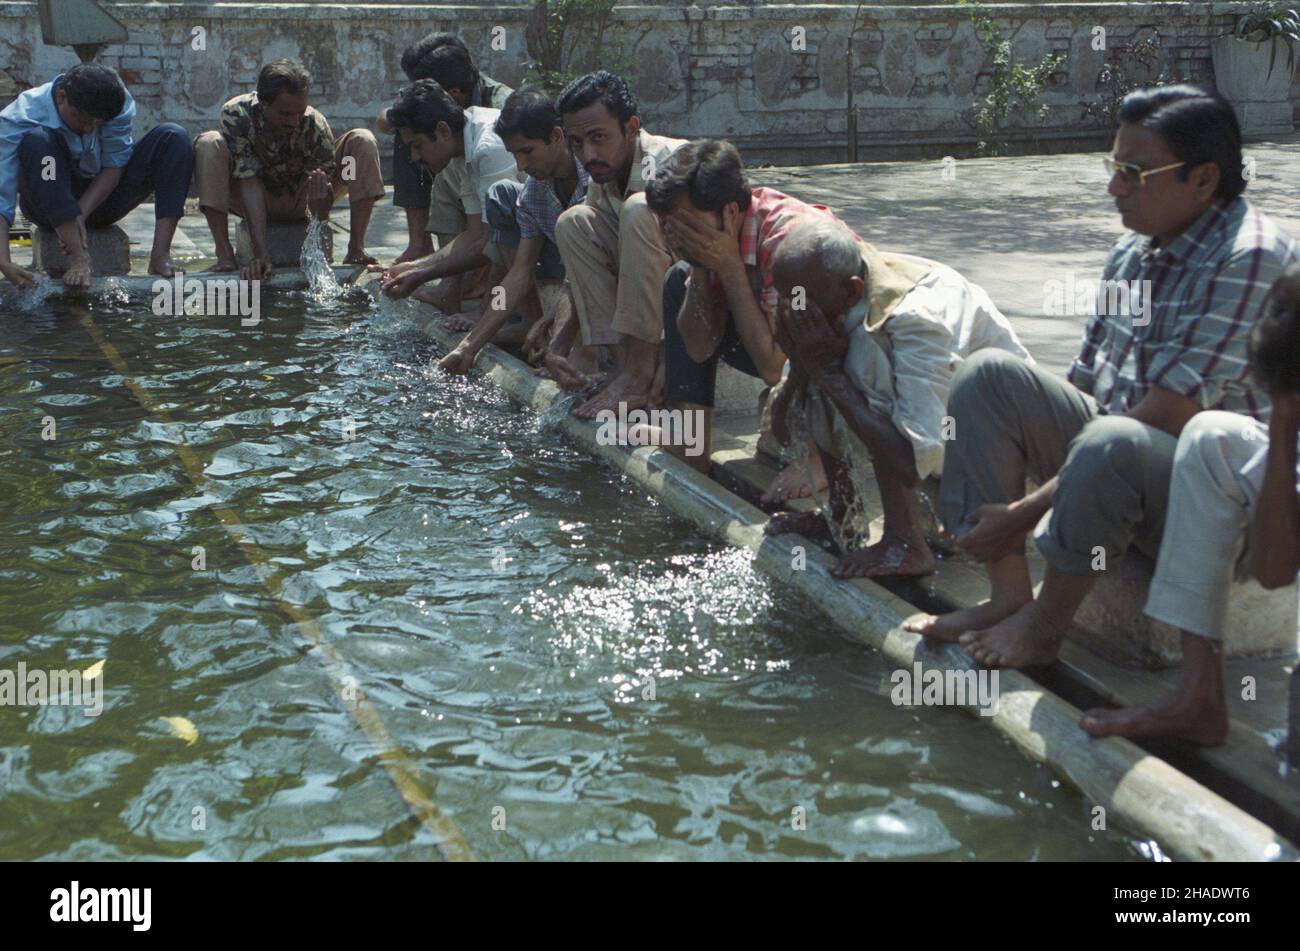 Indie Ahmedabad 06.03.1994. Uliczna ³aŸnia. js  PAP/Janusz Mazur         Ahmedabad, India, 06 March 1994. People wash themselves in a public bath on a street in Ahmedabad in India. PAP/JANUSZ MAZUR Stock Photo